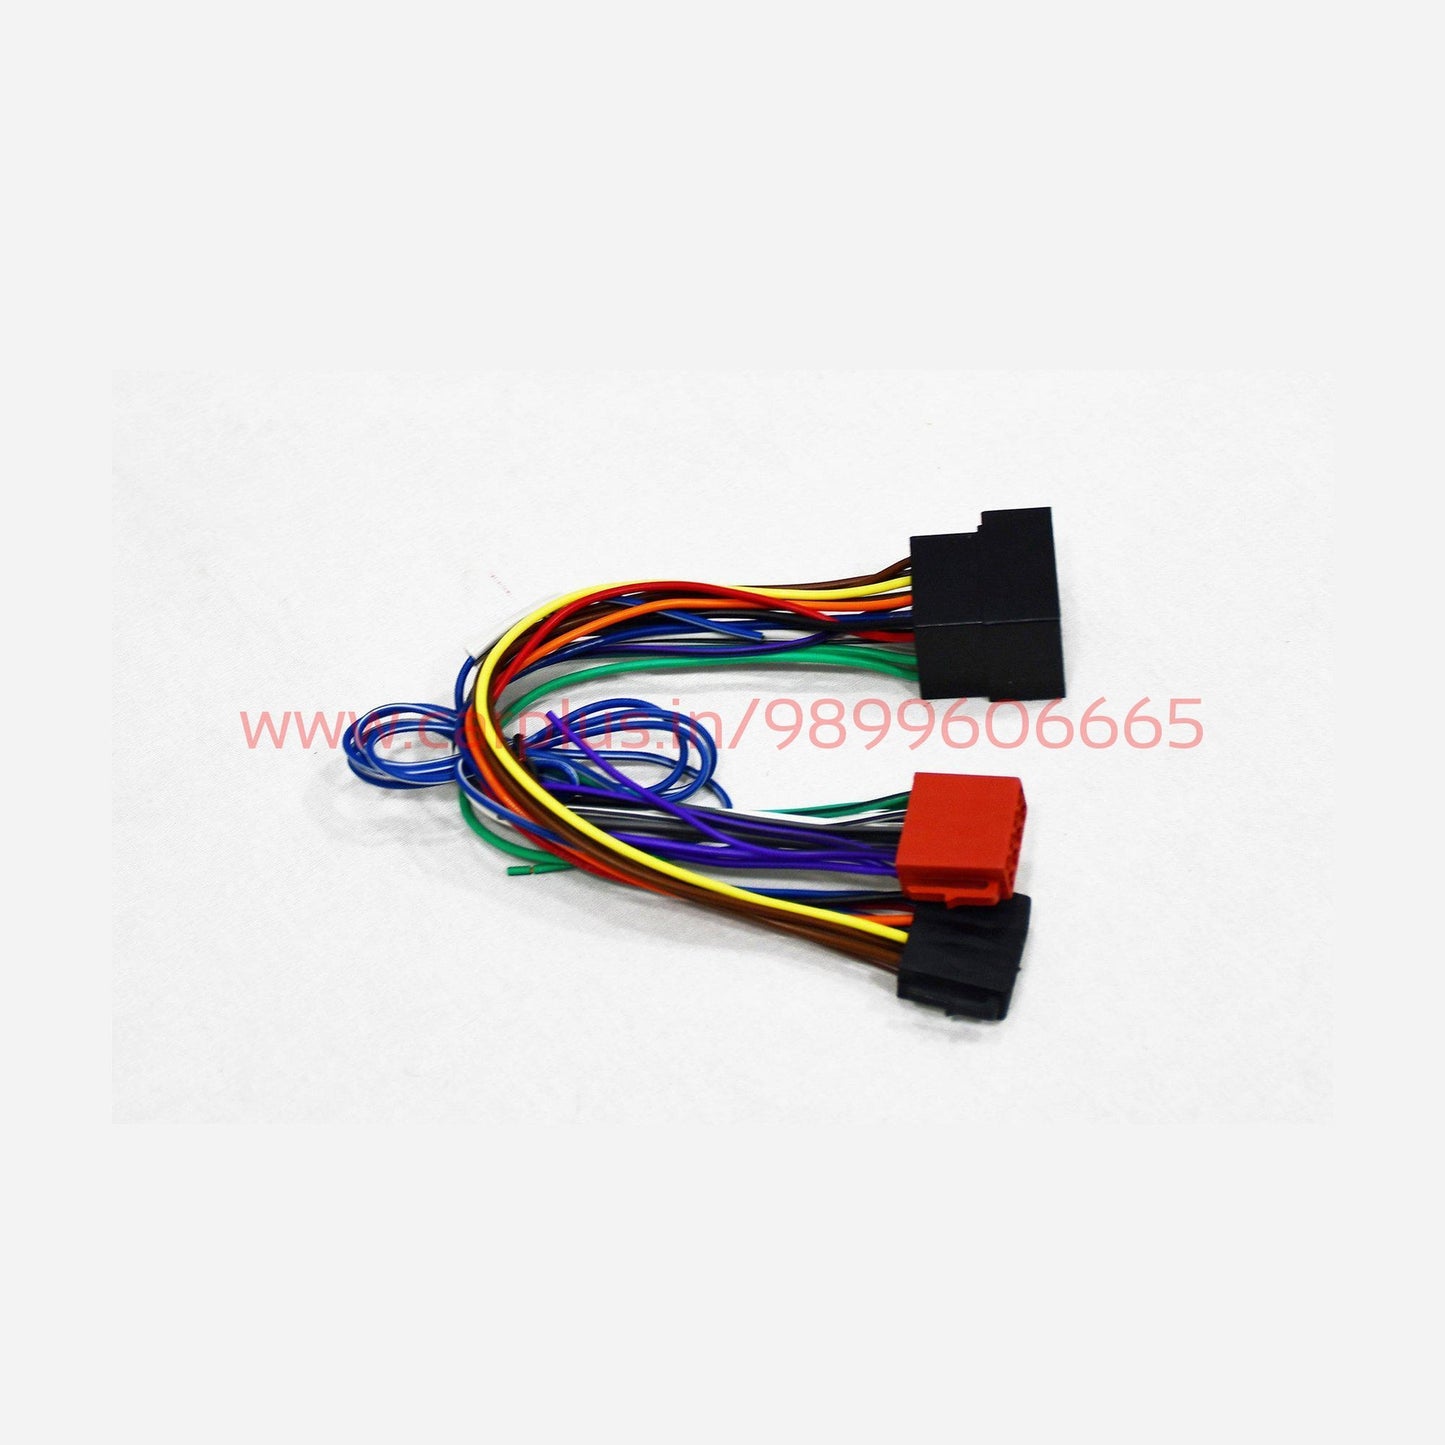 
                  
                    KMH Plug N Play Wiring Harness For HI-Low Converter Tata KMH-HI-LOW CONVERTOR HARNESS HI-LOW CONVERTER.
                  
                